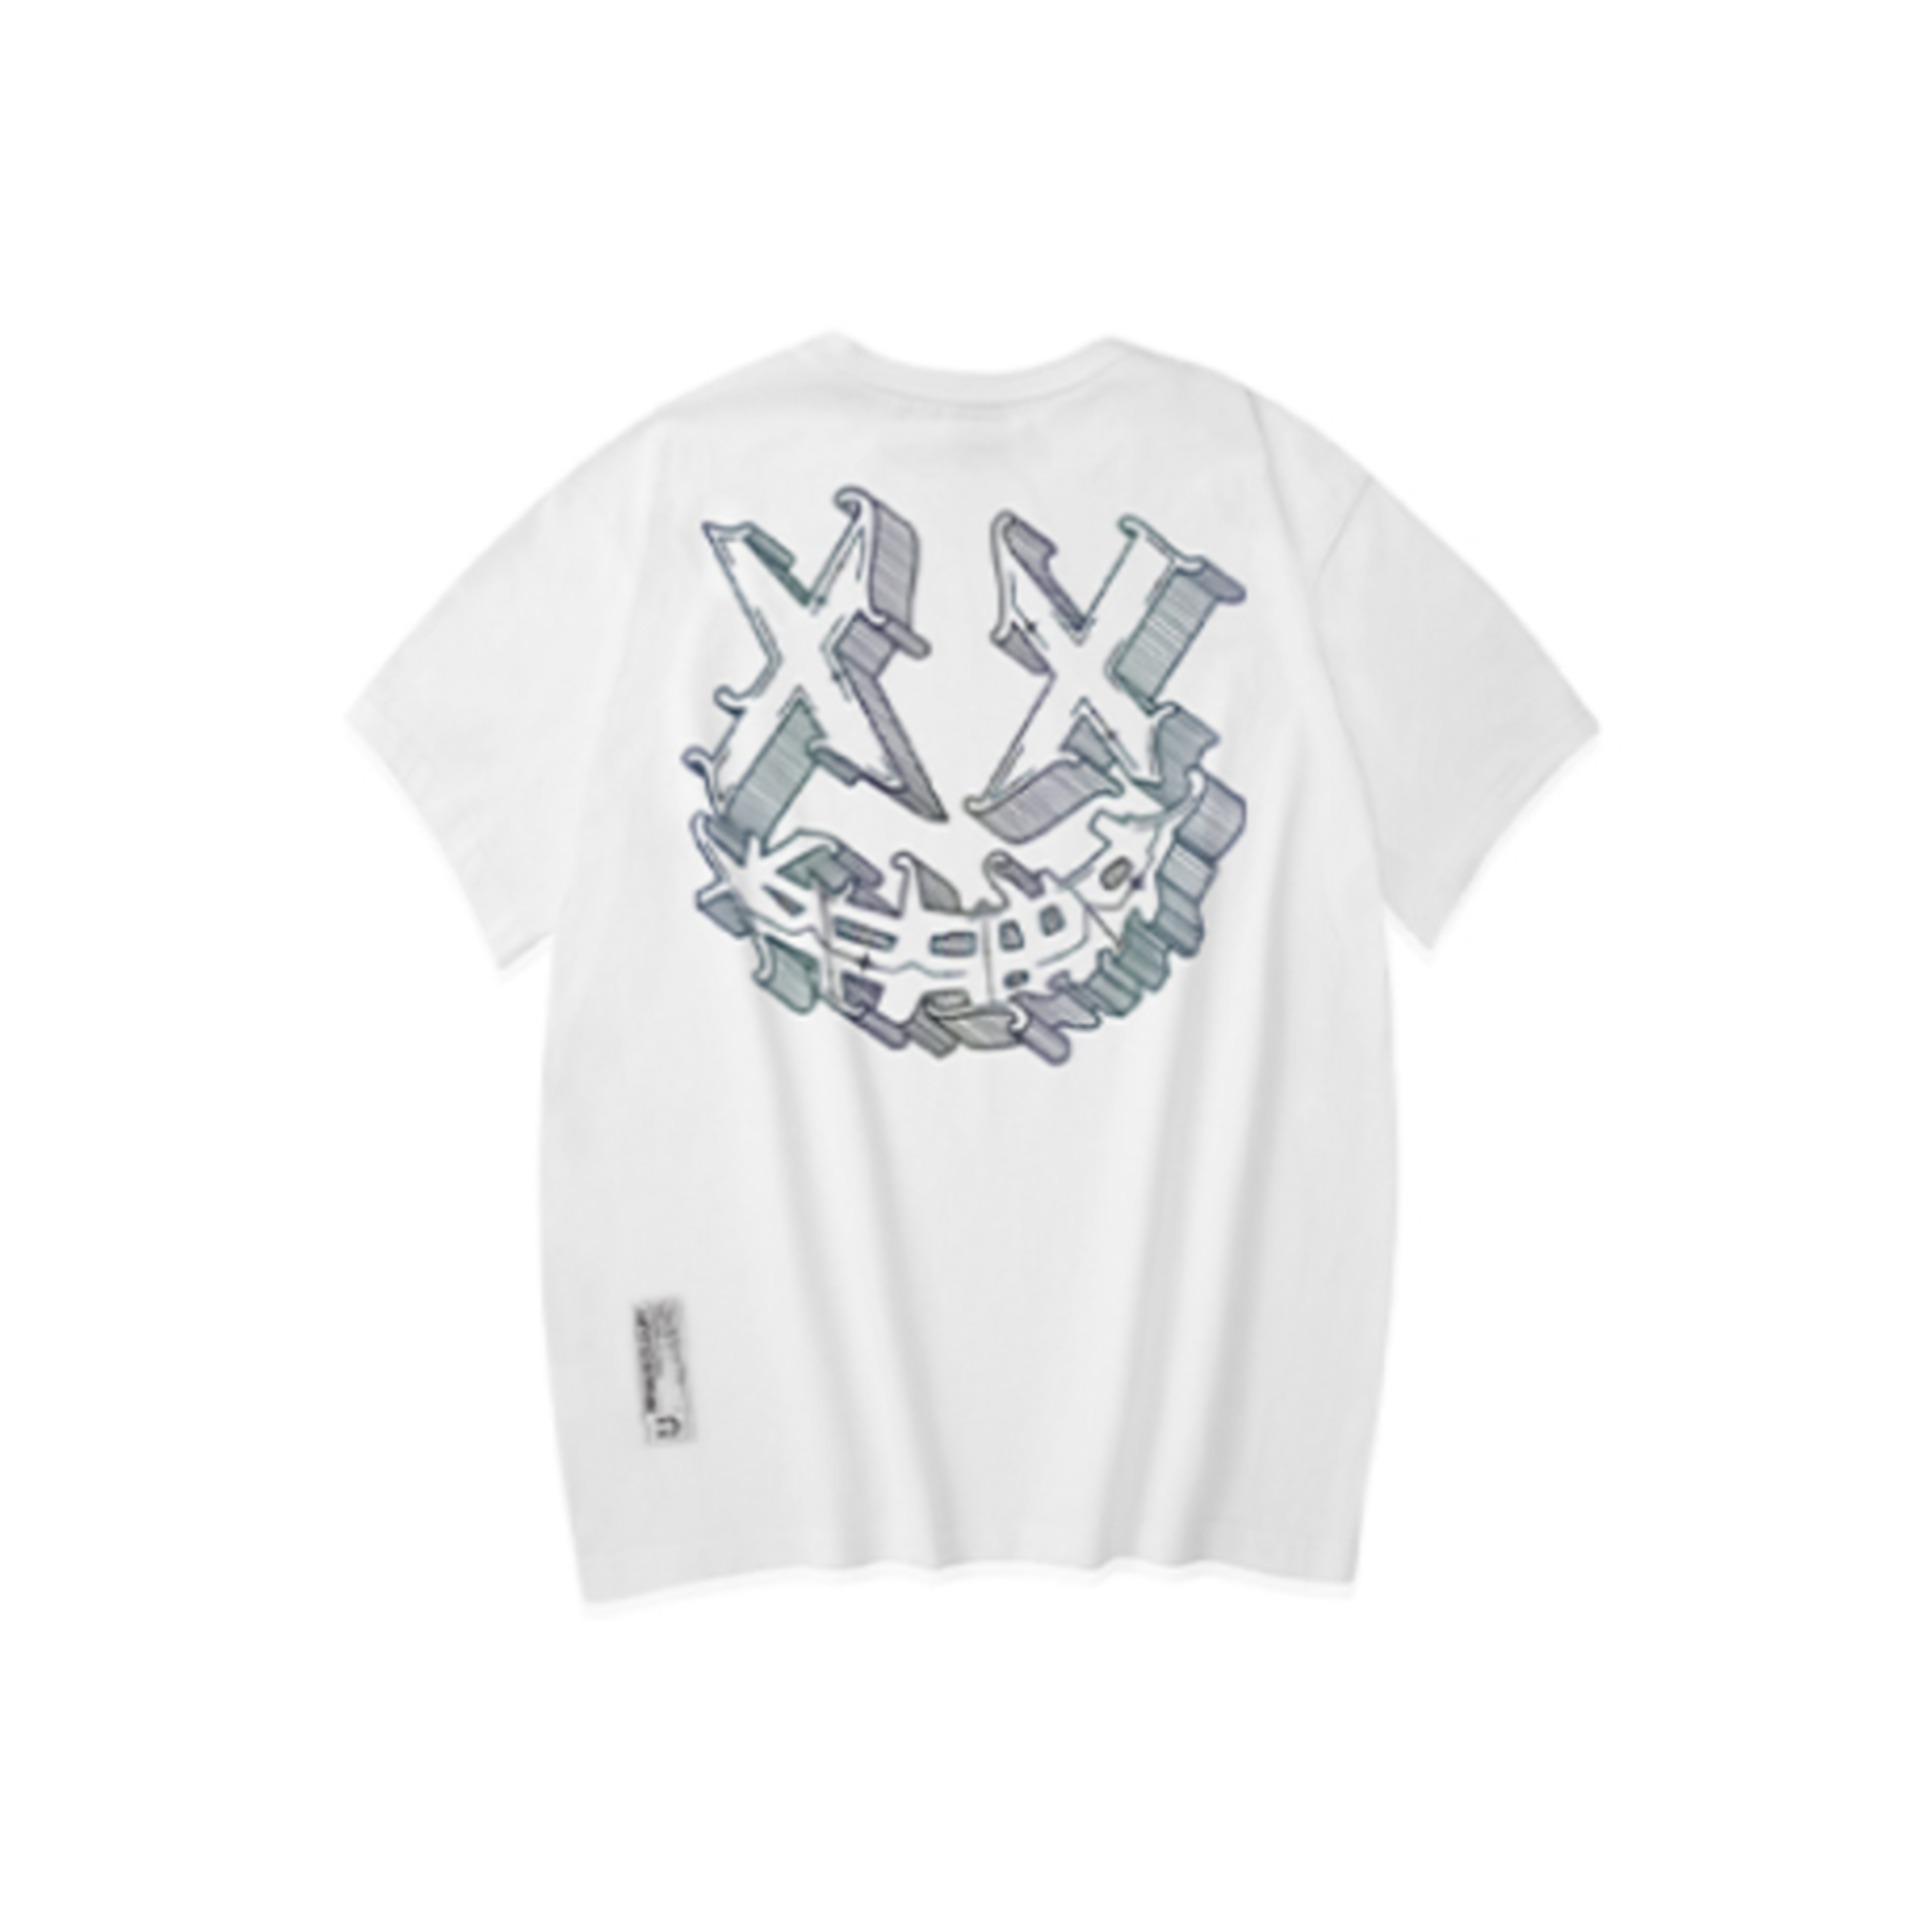 Rickyisclown [RIC] Gothic Words Tearing Smiley Laser Printing Tee 'White'